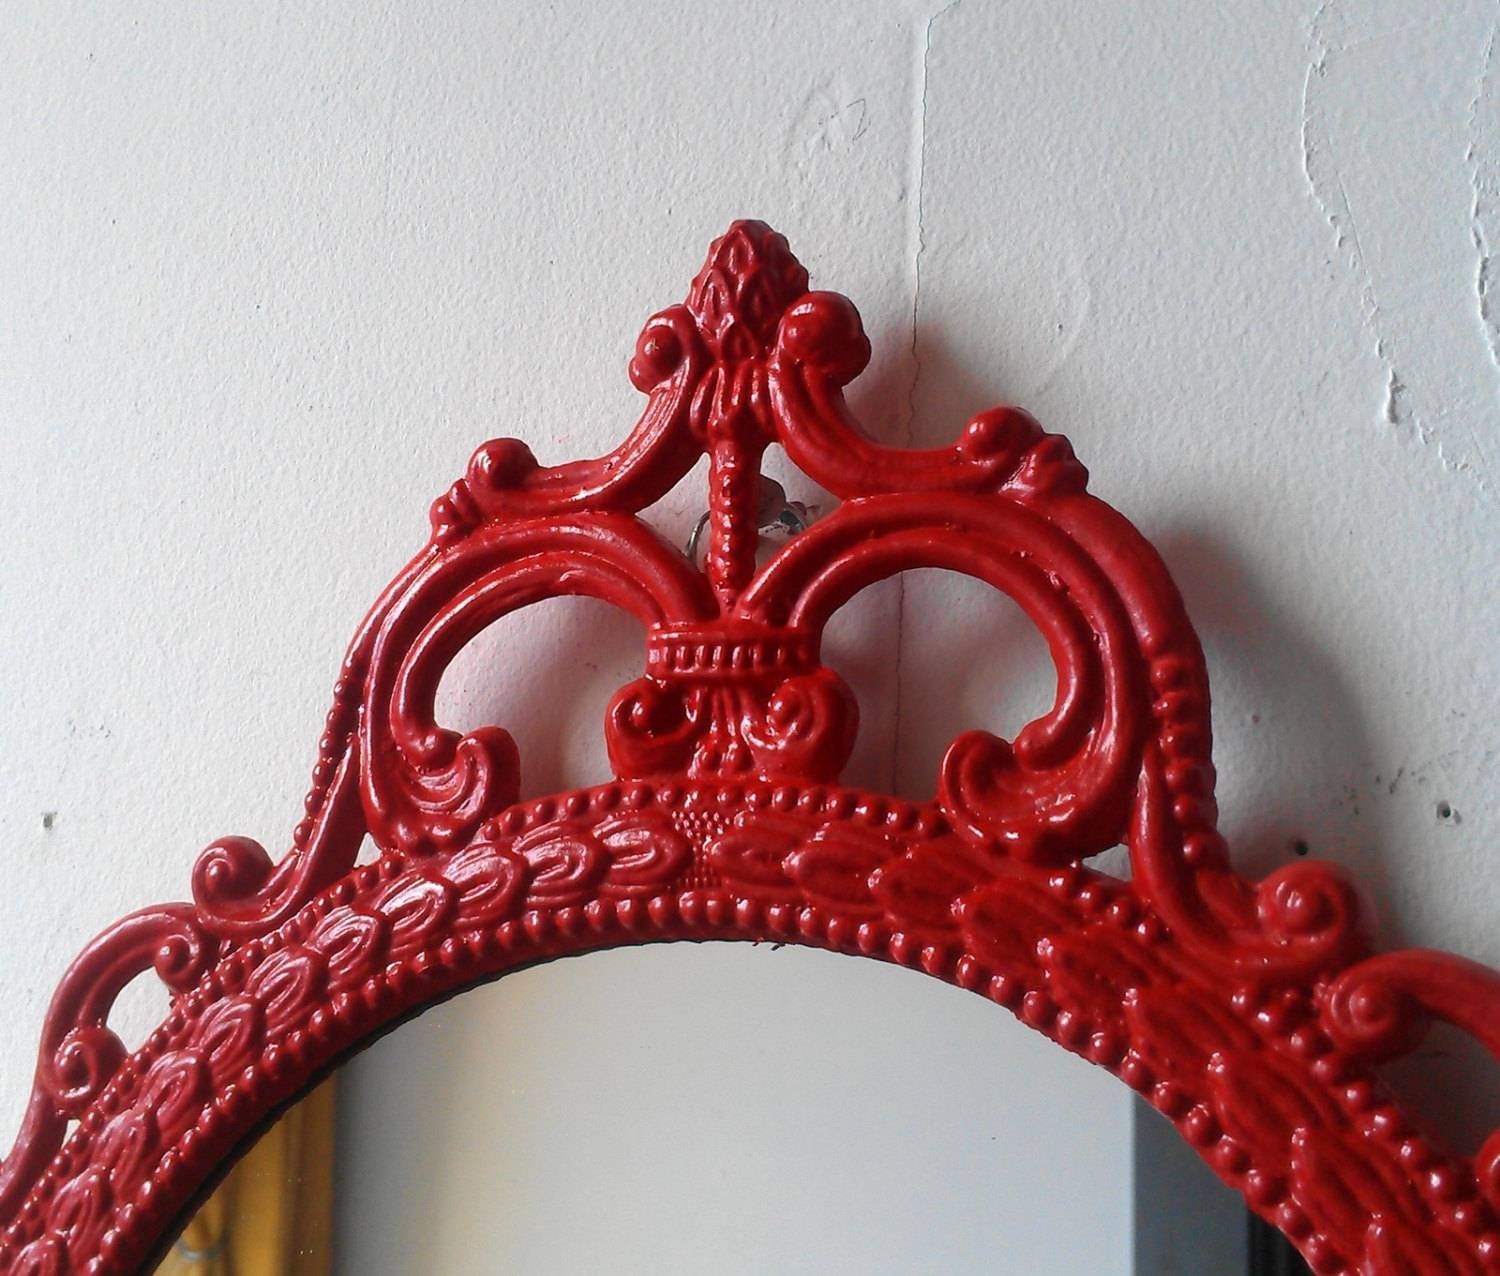 Oval Mirror In Vintage Metal Frame Ornate Decorative Framed Throughout Red Mirrors (View 3 of 25)